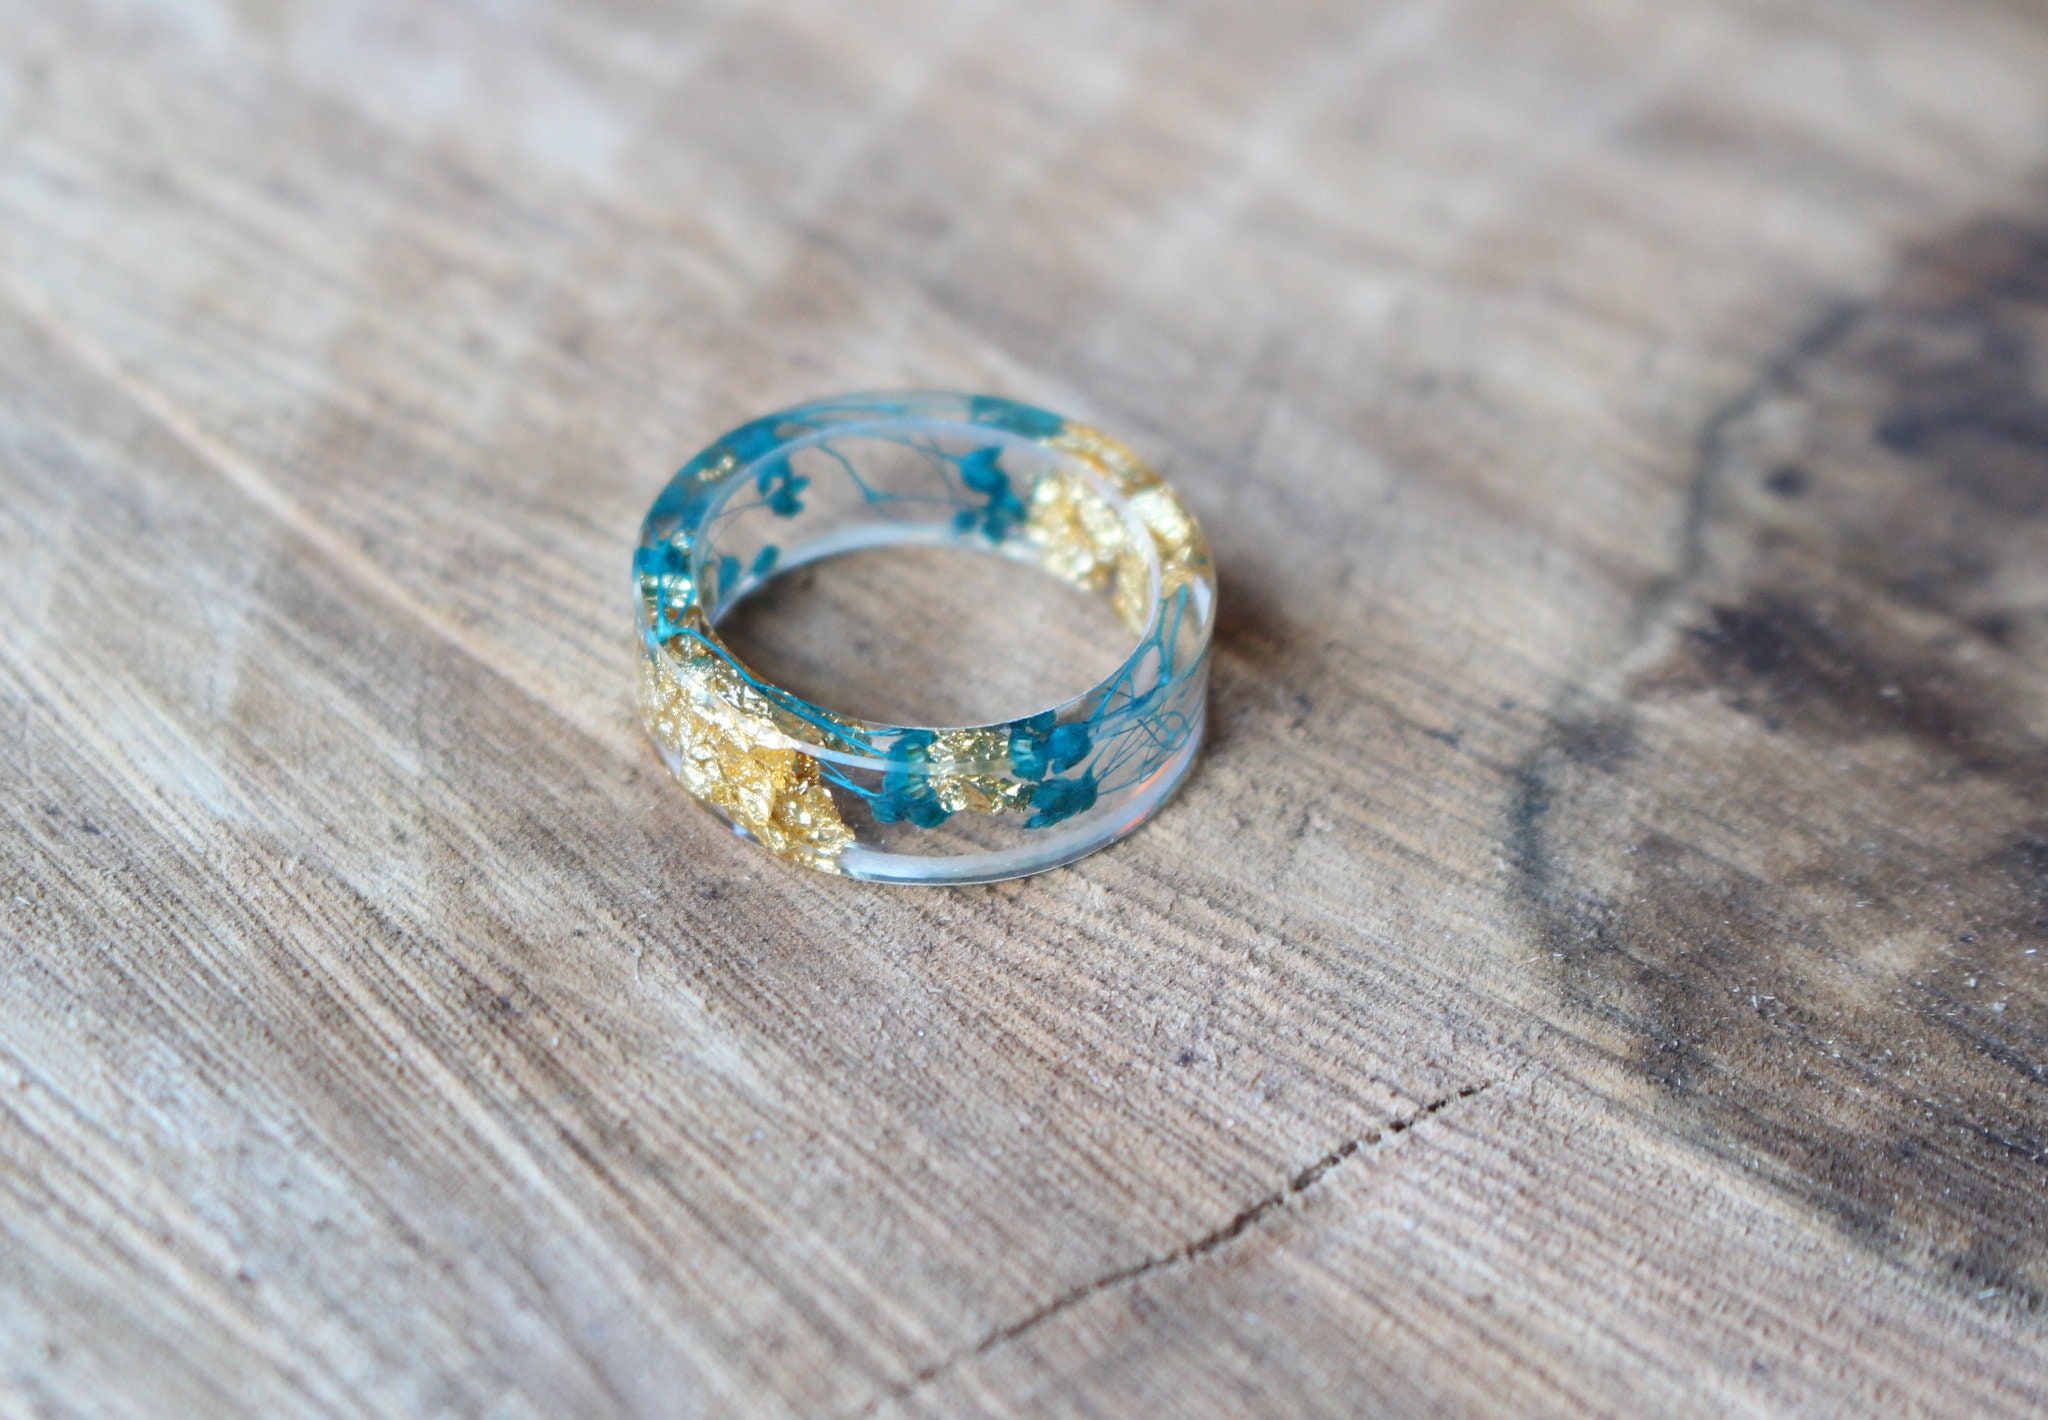 Pressed Flower Gold Flakes Sea Shells Resin Ring, Cool Forest Girl Proposal Promise Simple Wedding Rings Band